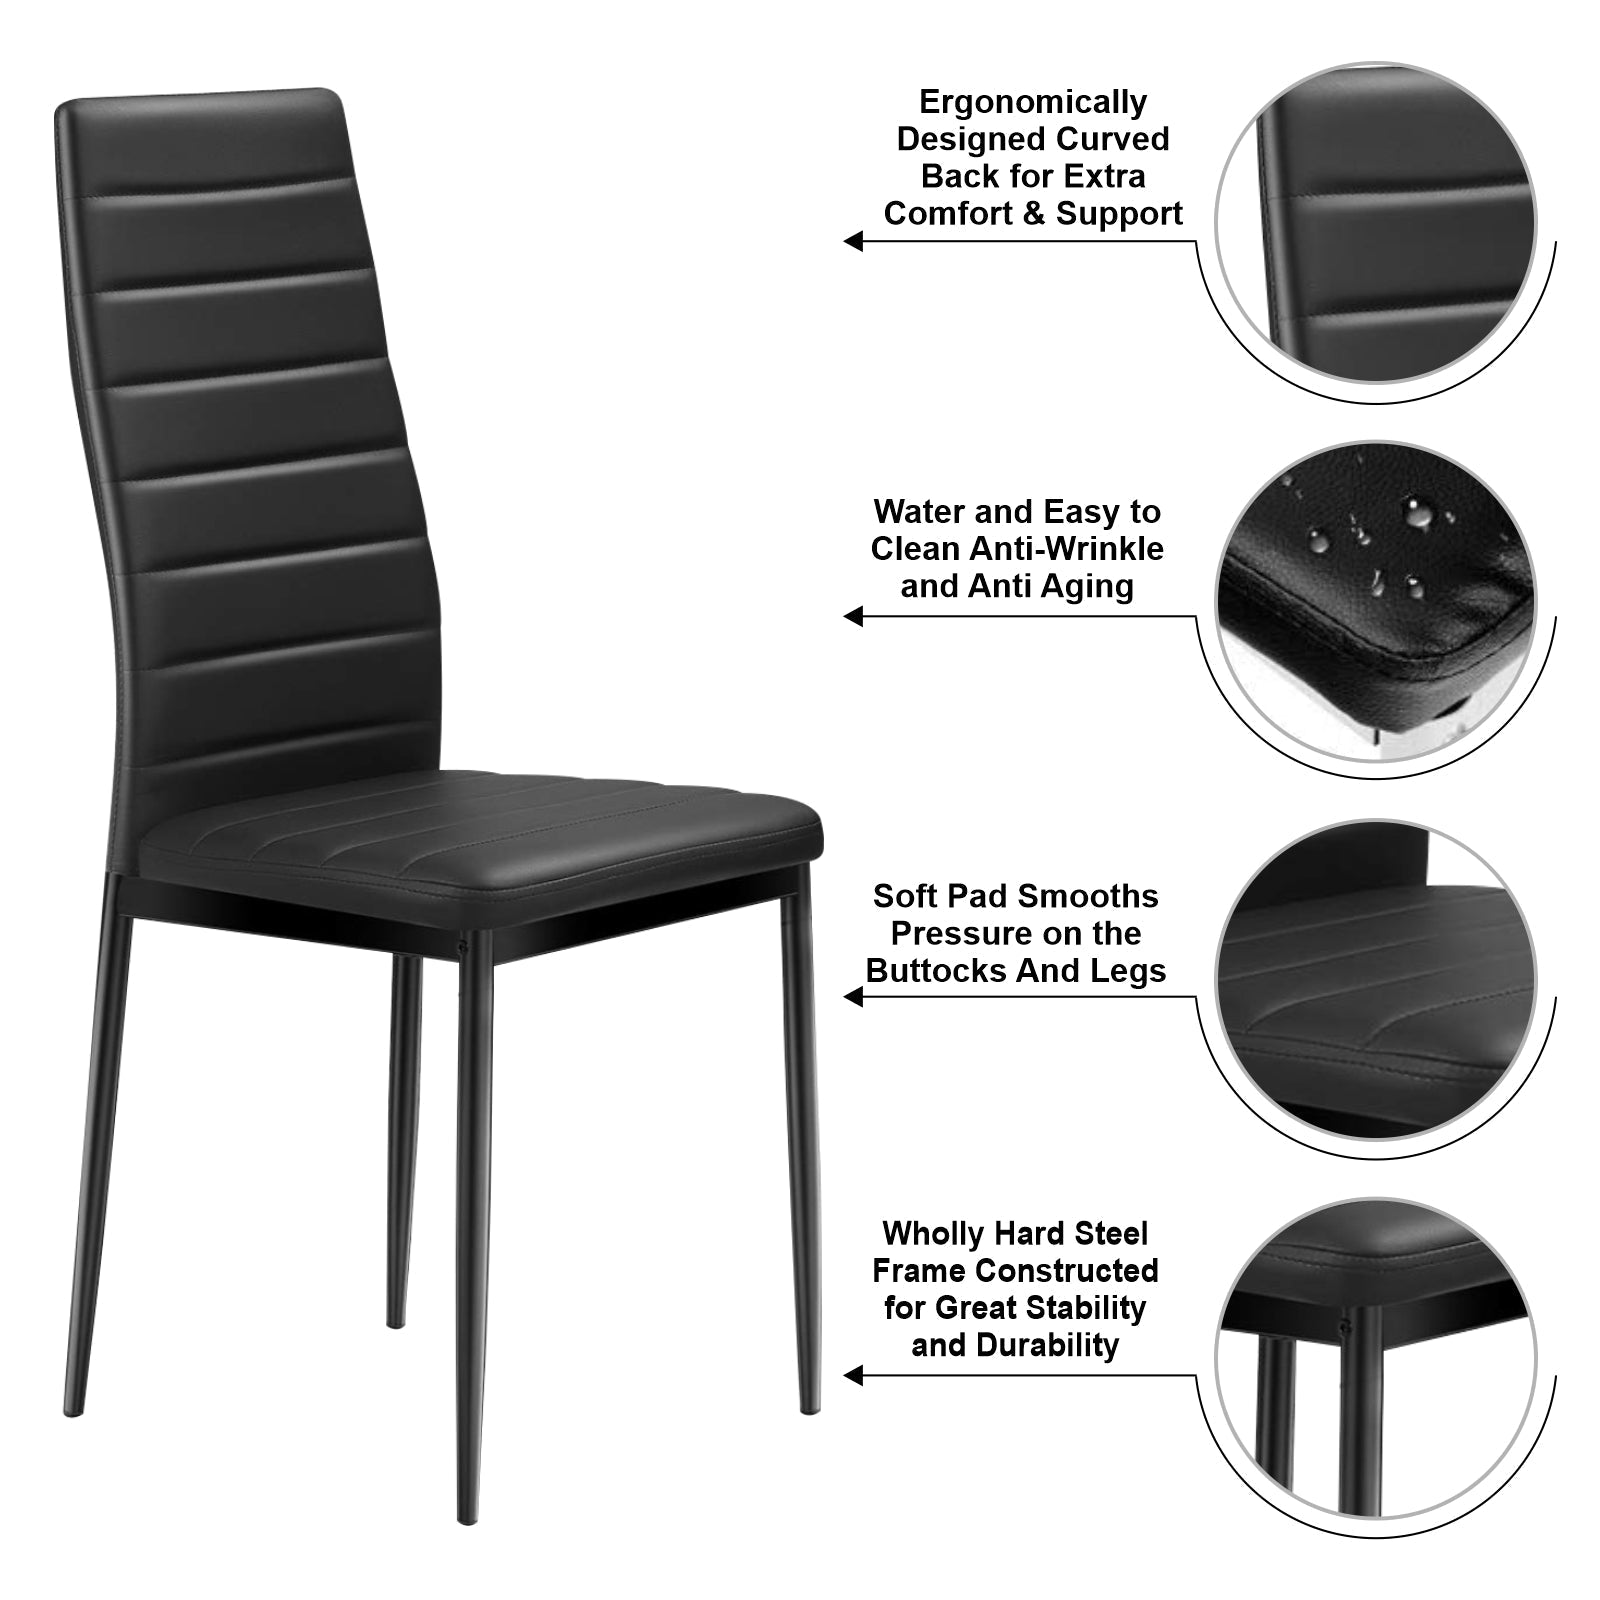 black dining chairs